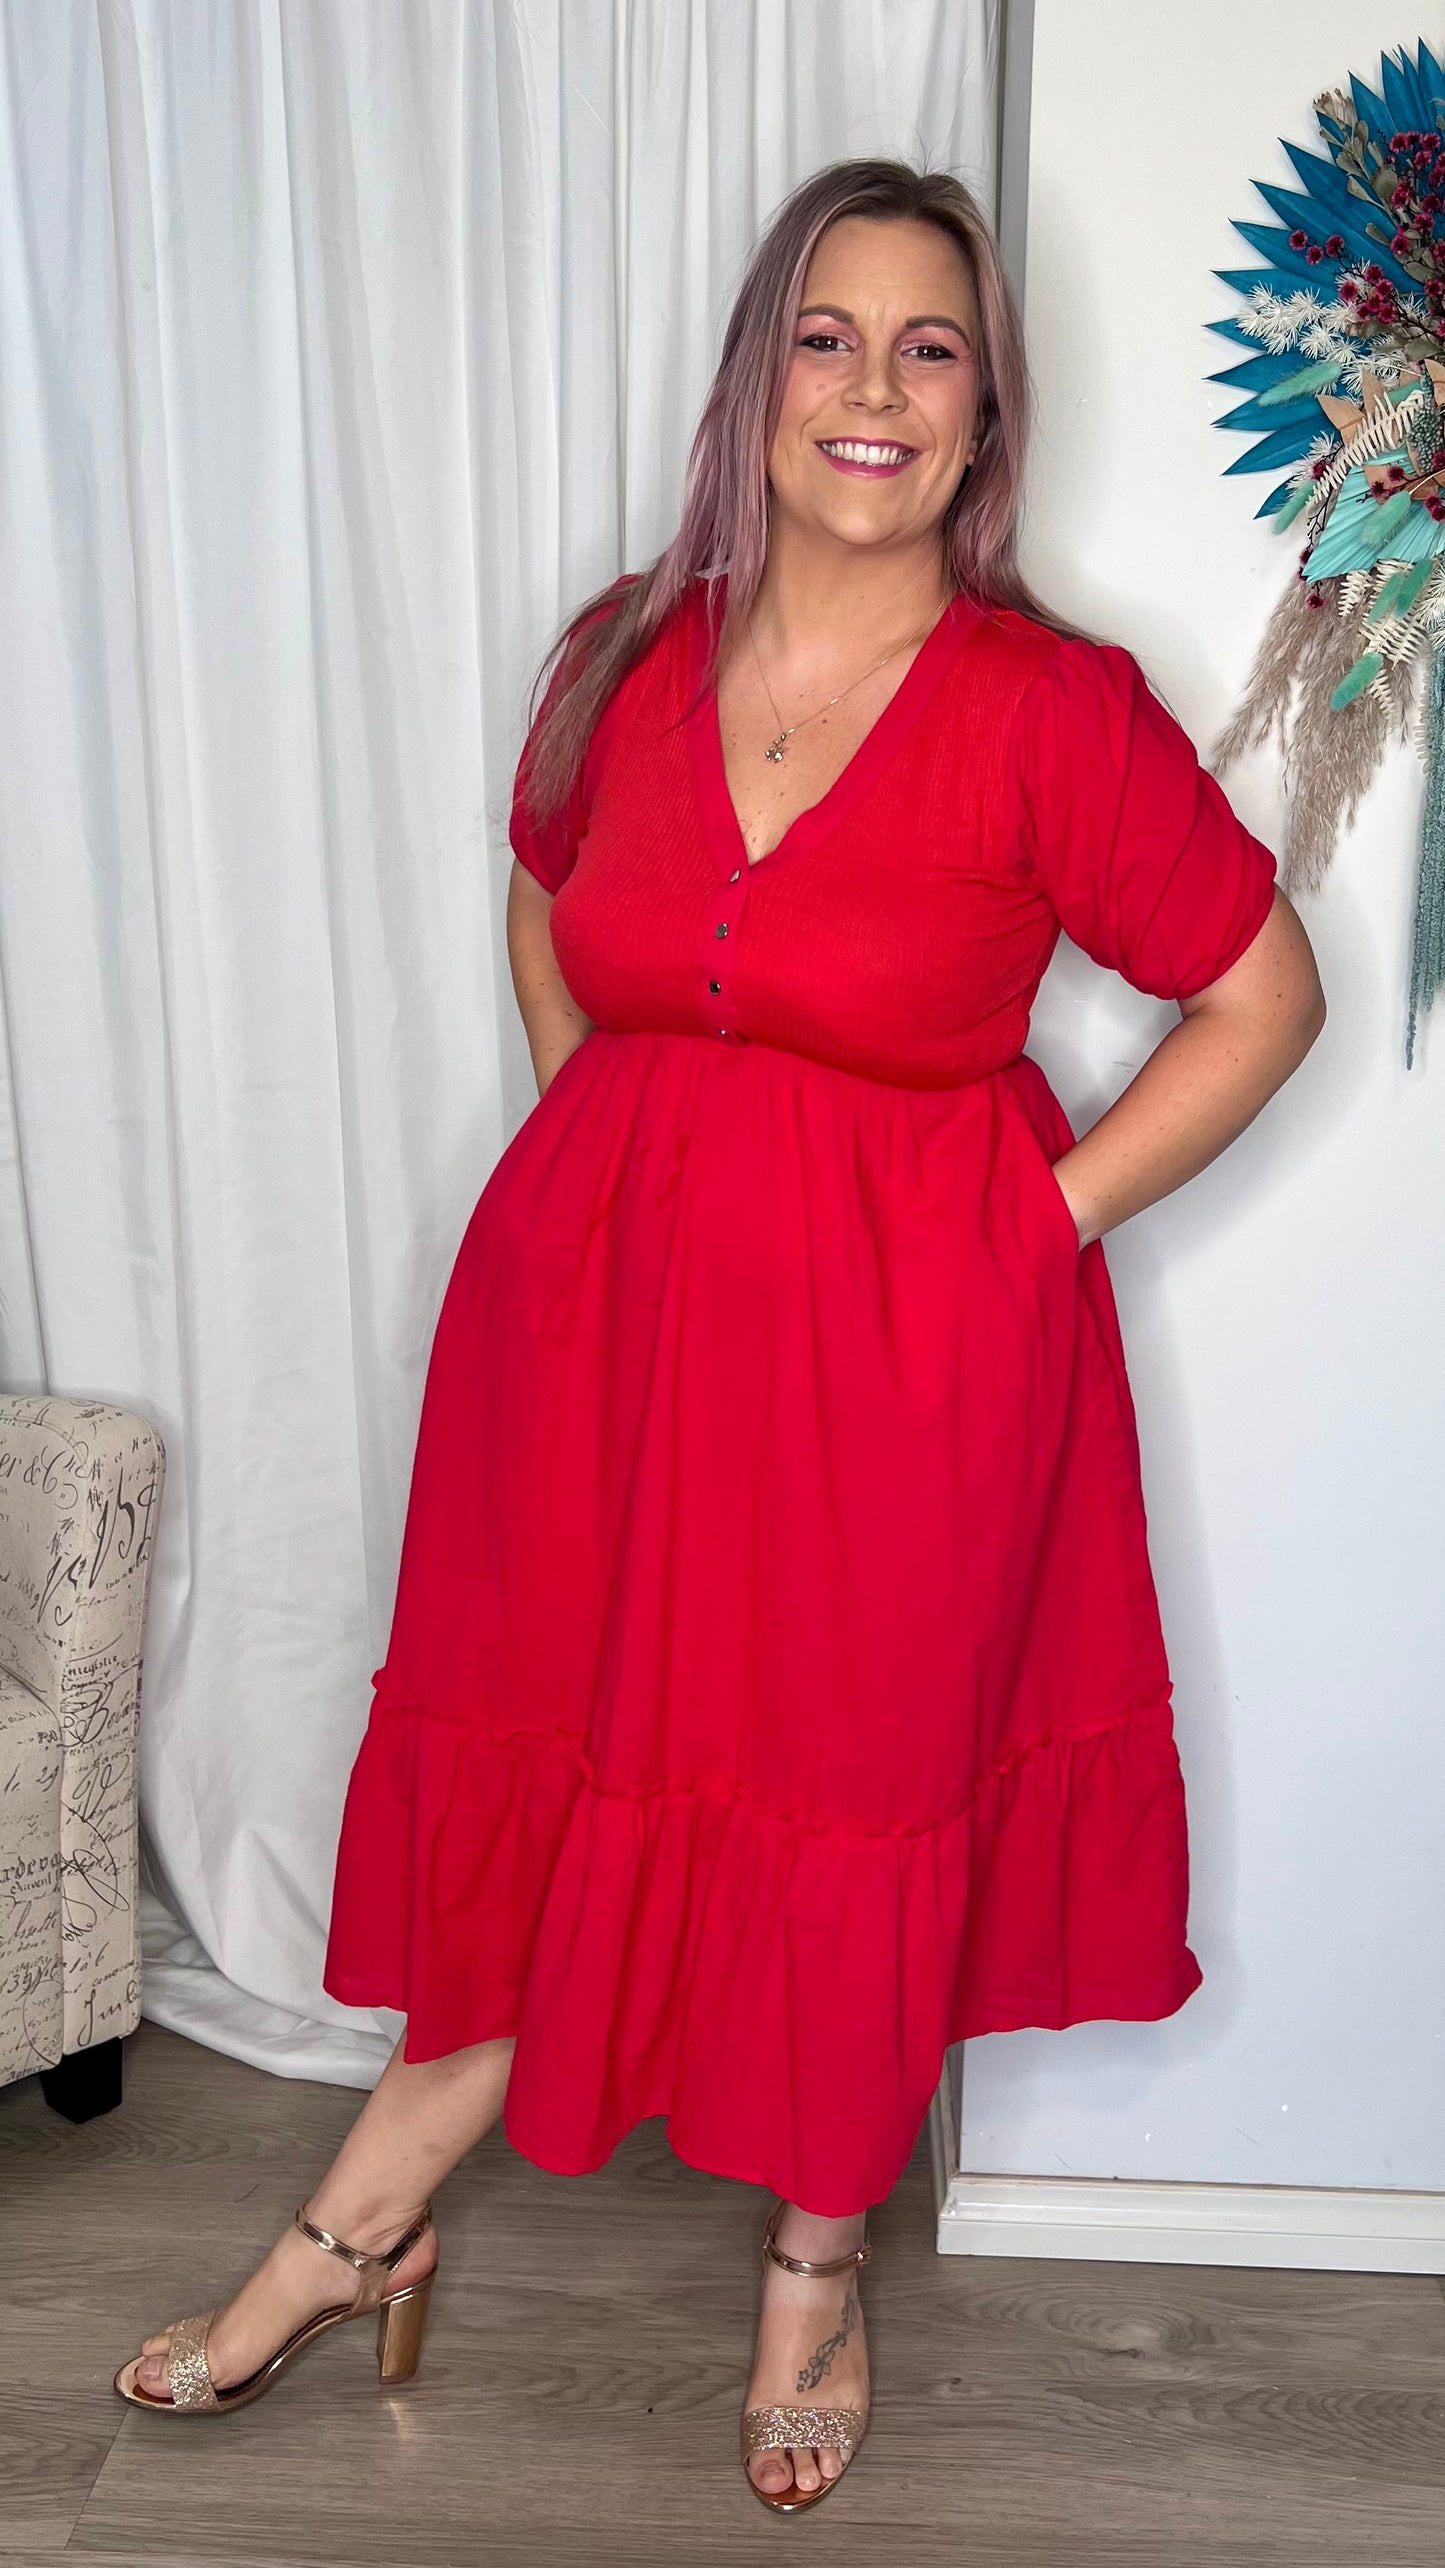 **NEW** Noelle Dress: Look no further your festive frock is found! Our new Noelle Dress in vibrant red is fun and oh so flirty!! The puff sleeve, v neckline and ruffle hem give this dress - Ciao Bella Dresses 